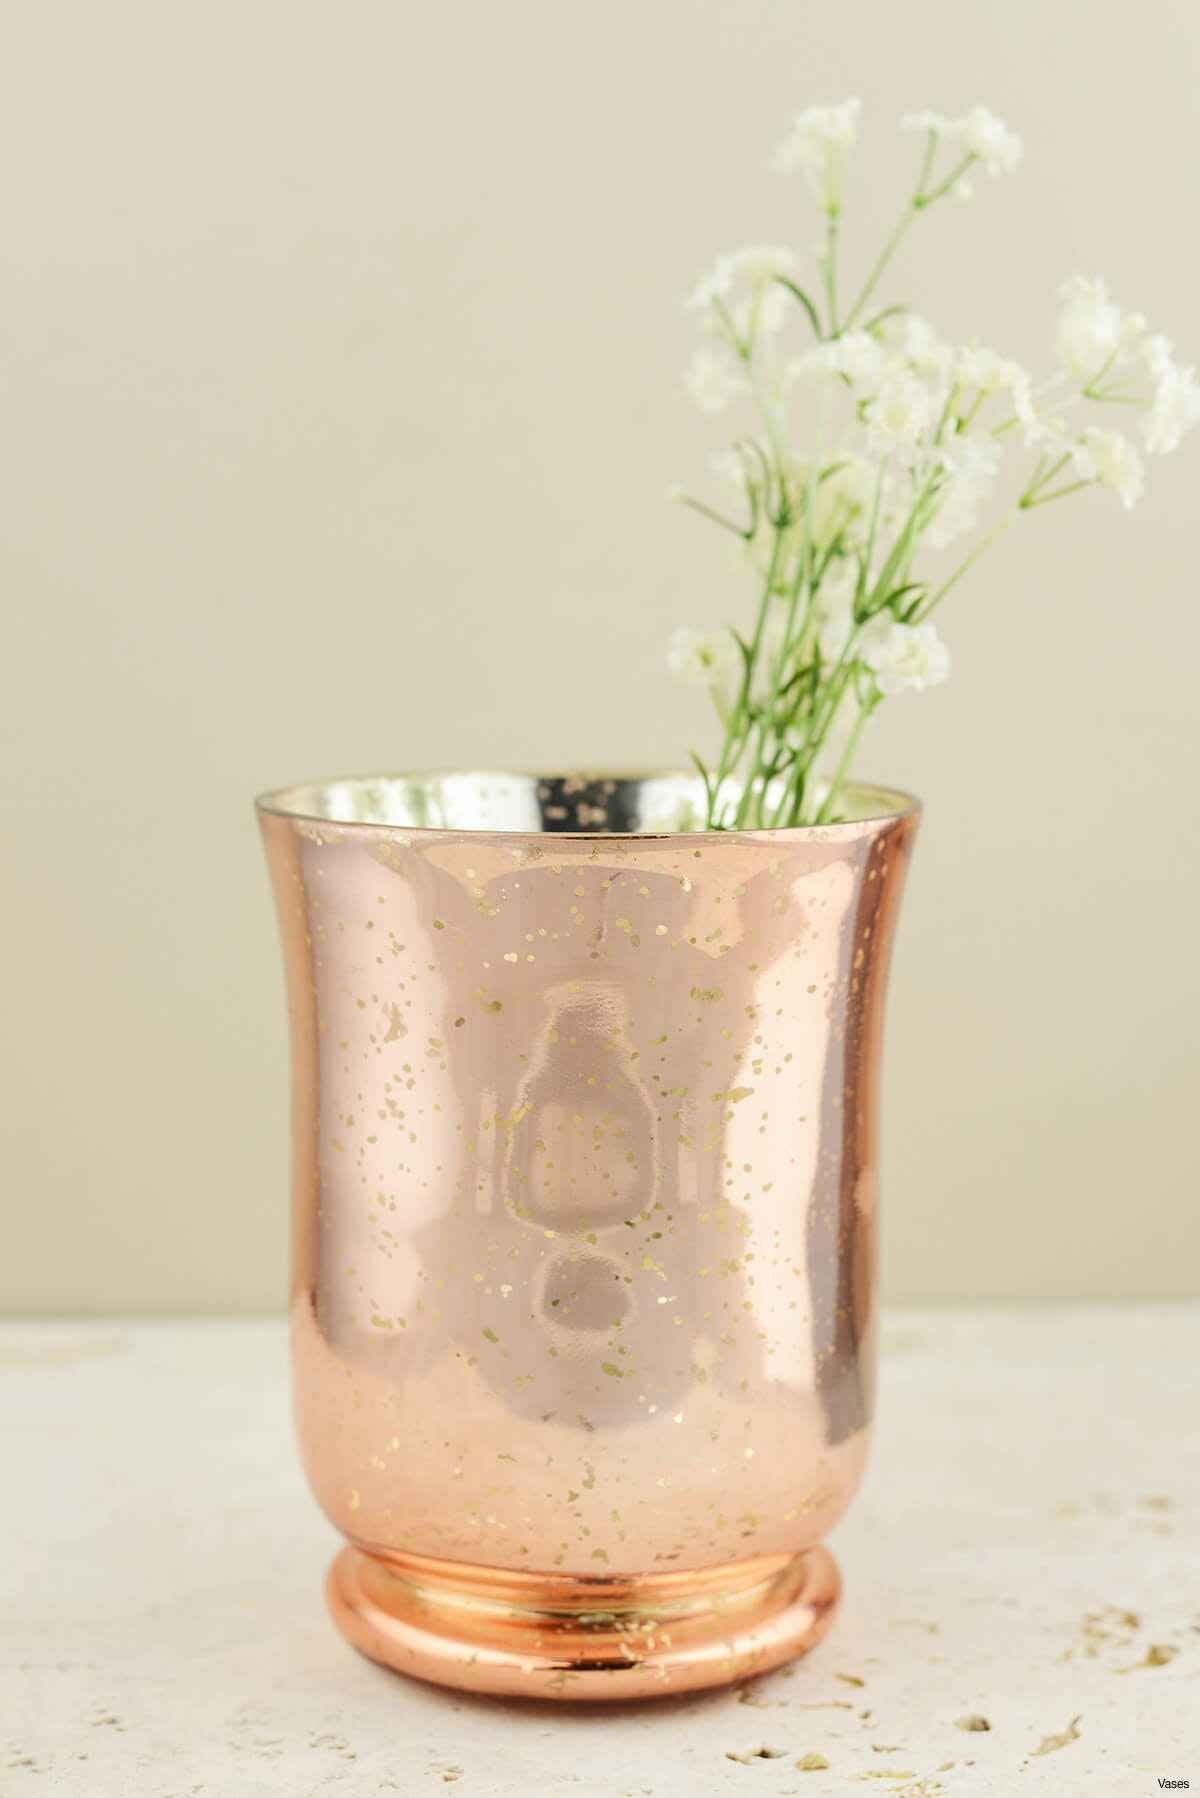 16 Famous Rose Glass Vase 2024 free download rose glass vase of 34 gold mercury glass vases the weekly world with regard to gold mercury glass vases awesome 50 fresh collection candle holders rose gold of gold mercury glass vases